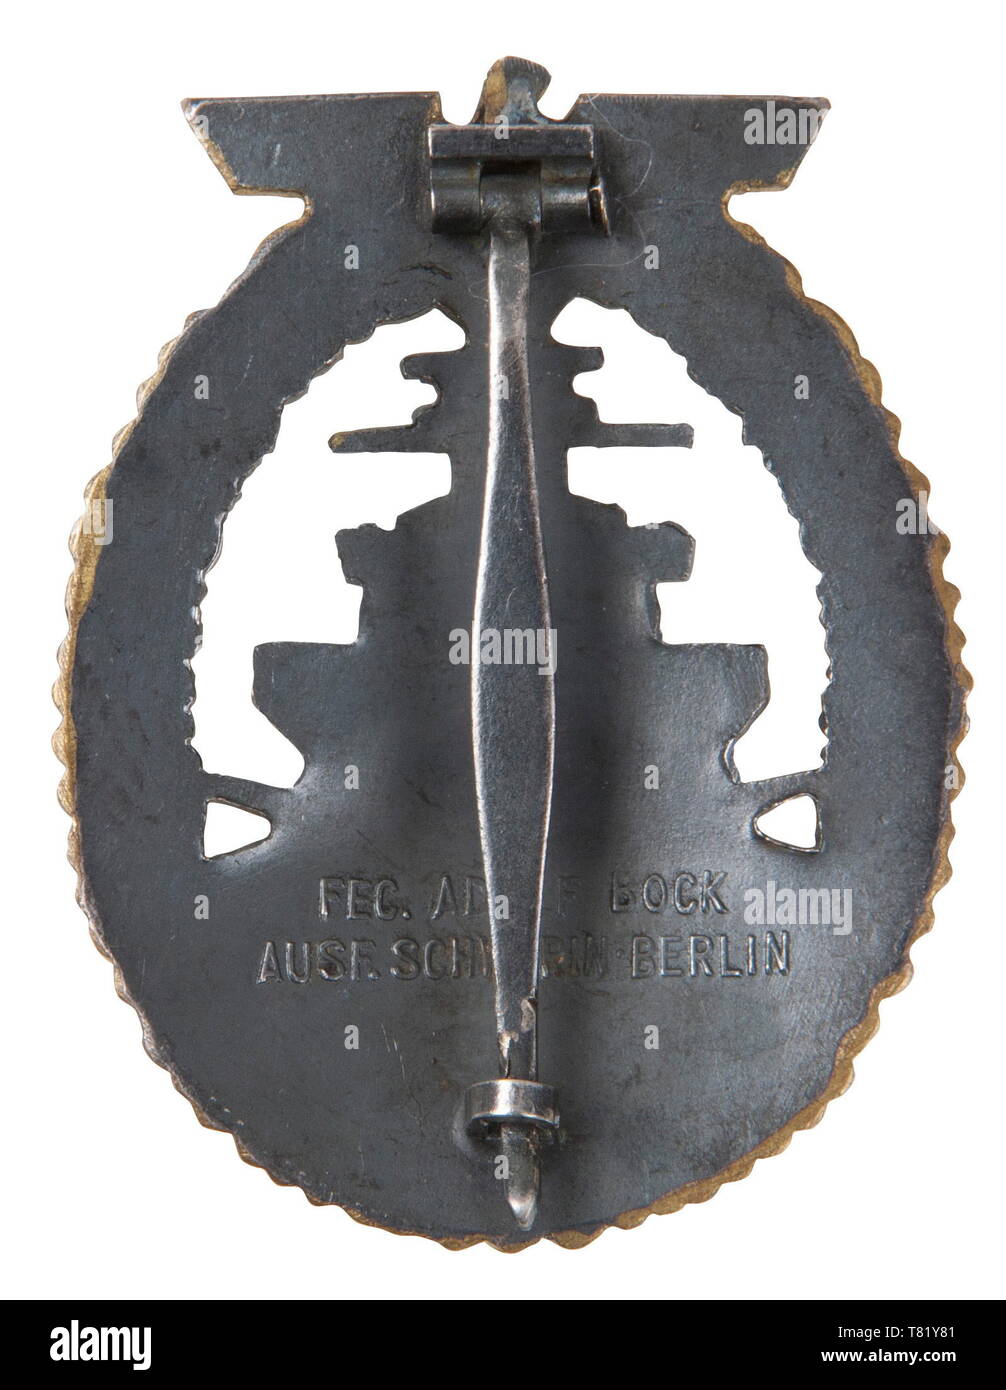 A High Seas Fleet War Badge Maker C. Schwerin u. Sohn. Early tombak example with raised trademark, barrel hinge and vertical tapered pin. USA-Los historic, historical, awards, award, German Reich, Third Reich, Nazi era, National Socialism, object, objects, stills, medal, decoration, medals, decorations, clipping, cut out, cut-out, cut-outs, honor, honour, National Socialist, Nazi, Nazi period, 20th century, Editorial-Use-Only Stock Photo